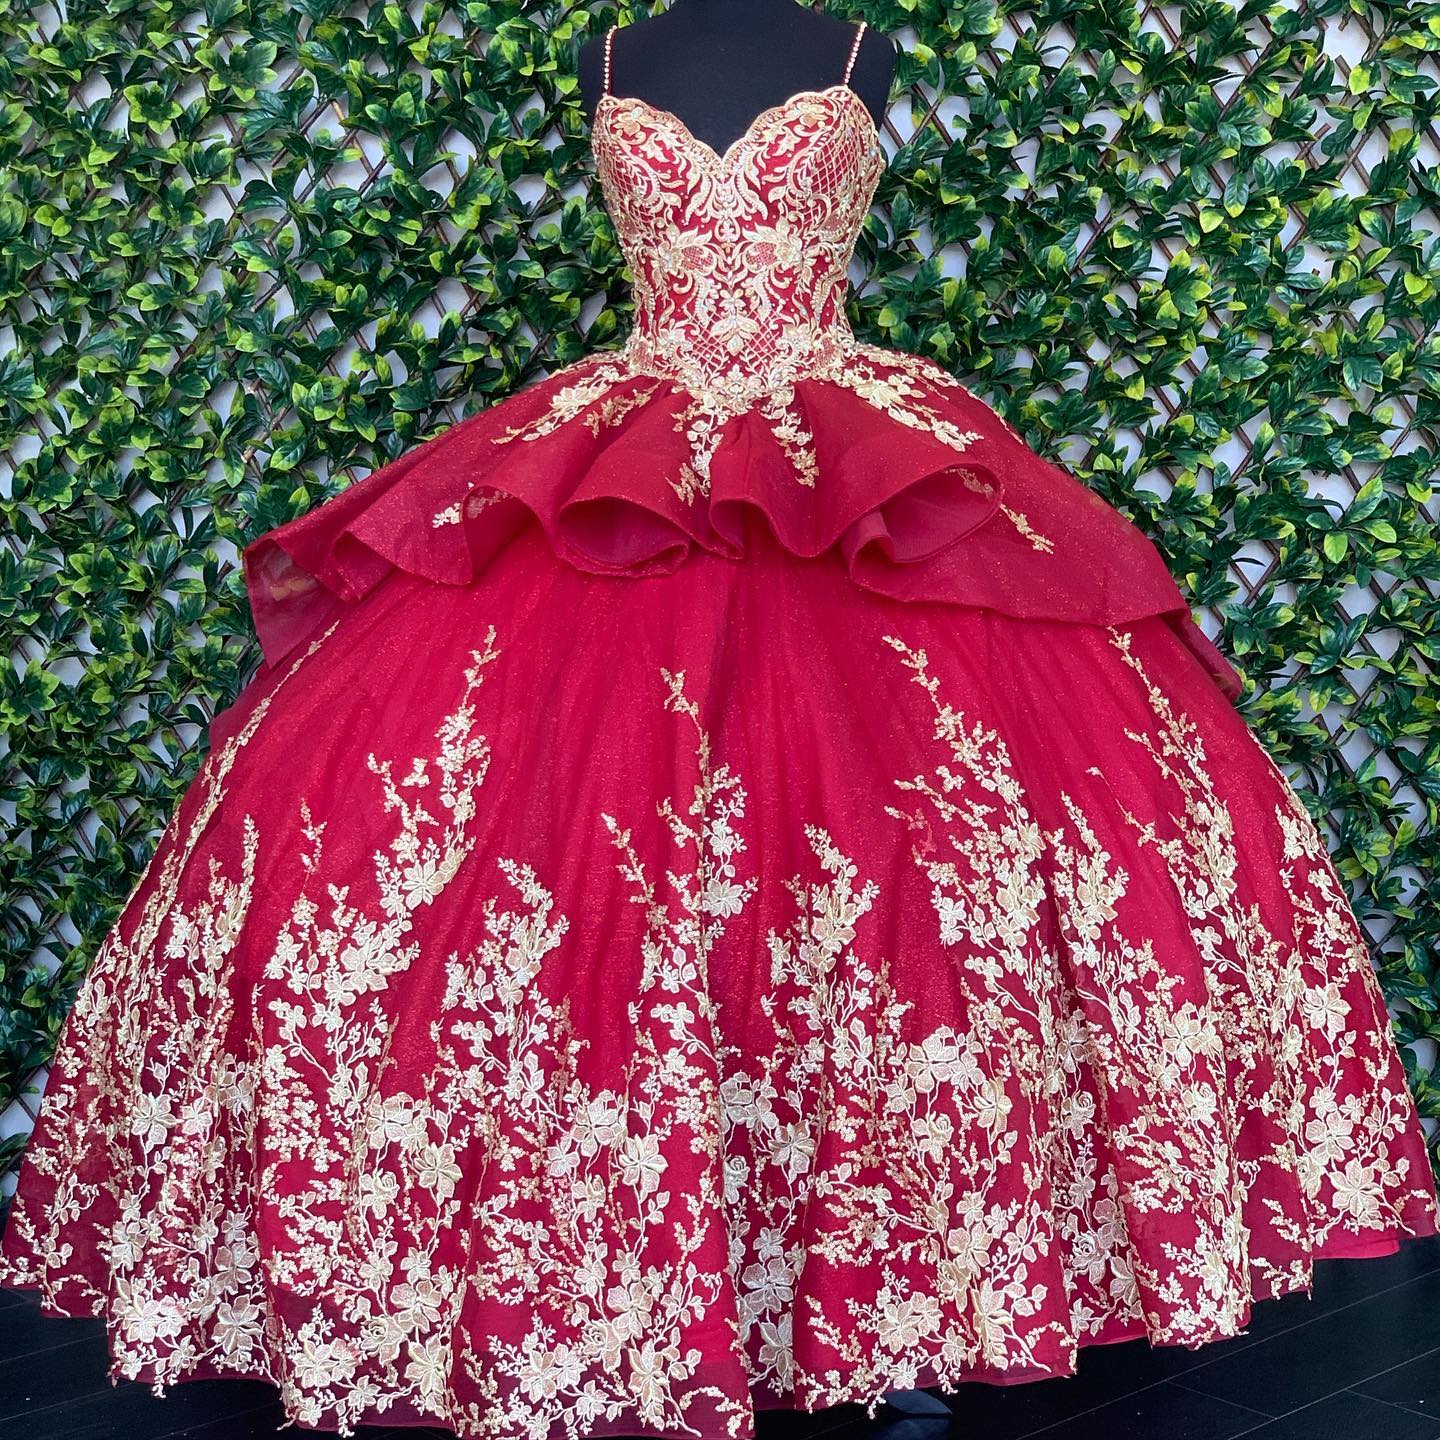 most beautiful quinceanera dress floers theme,beautiful quinceanera dress,mexican style quinceanera dress,modern mexican quinceanera dress,wine red quinceanera dress,burgundy and gold quinceanera dress,red quinceanera with gold embroidery,quinceanera dress with straps,corset quinceanera dress,quinceanera designers for dress,most expensive quinceanera dress,embroidery quinceanera dress,